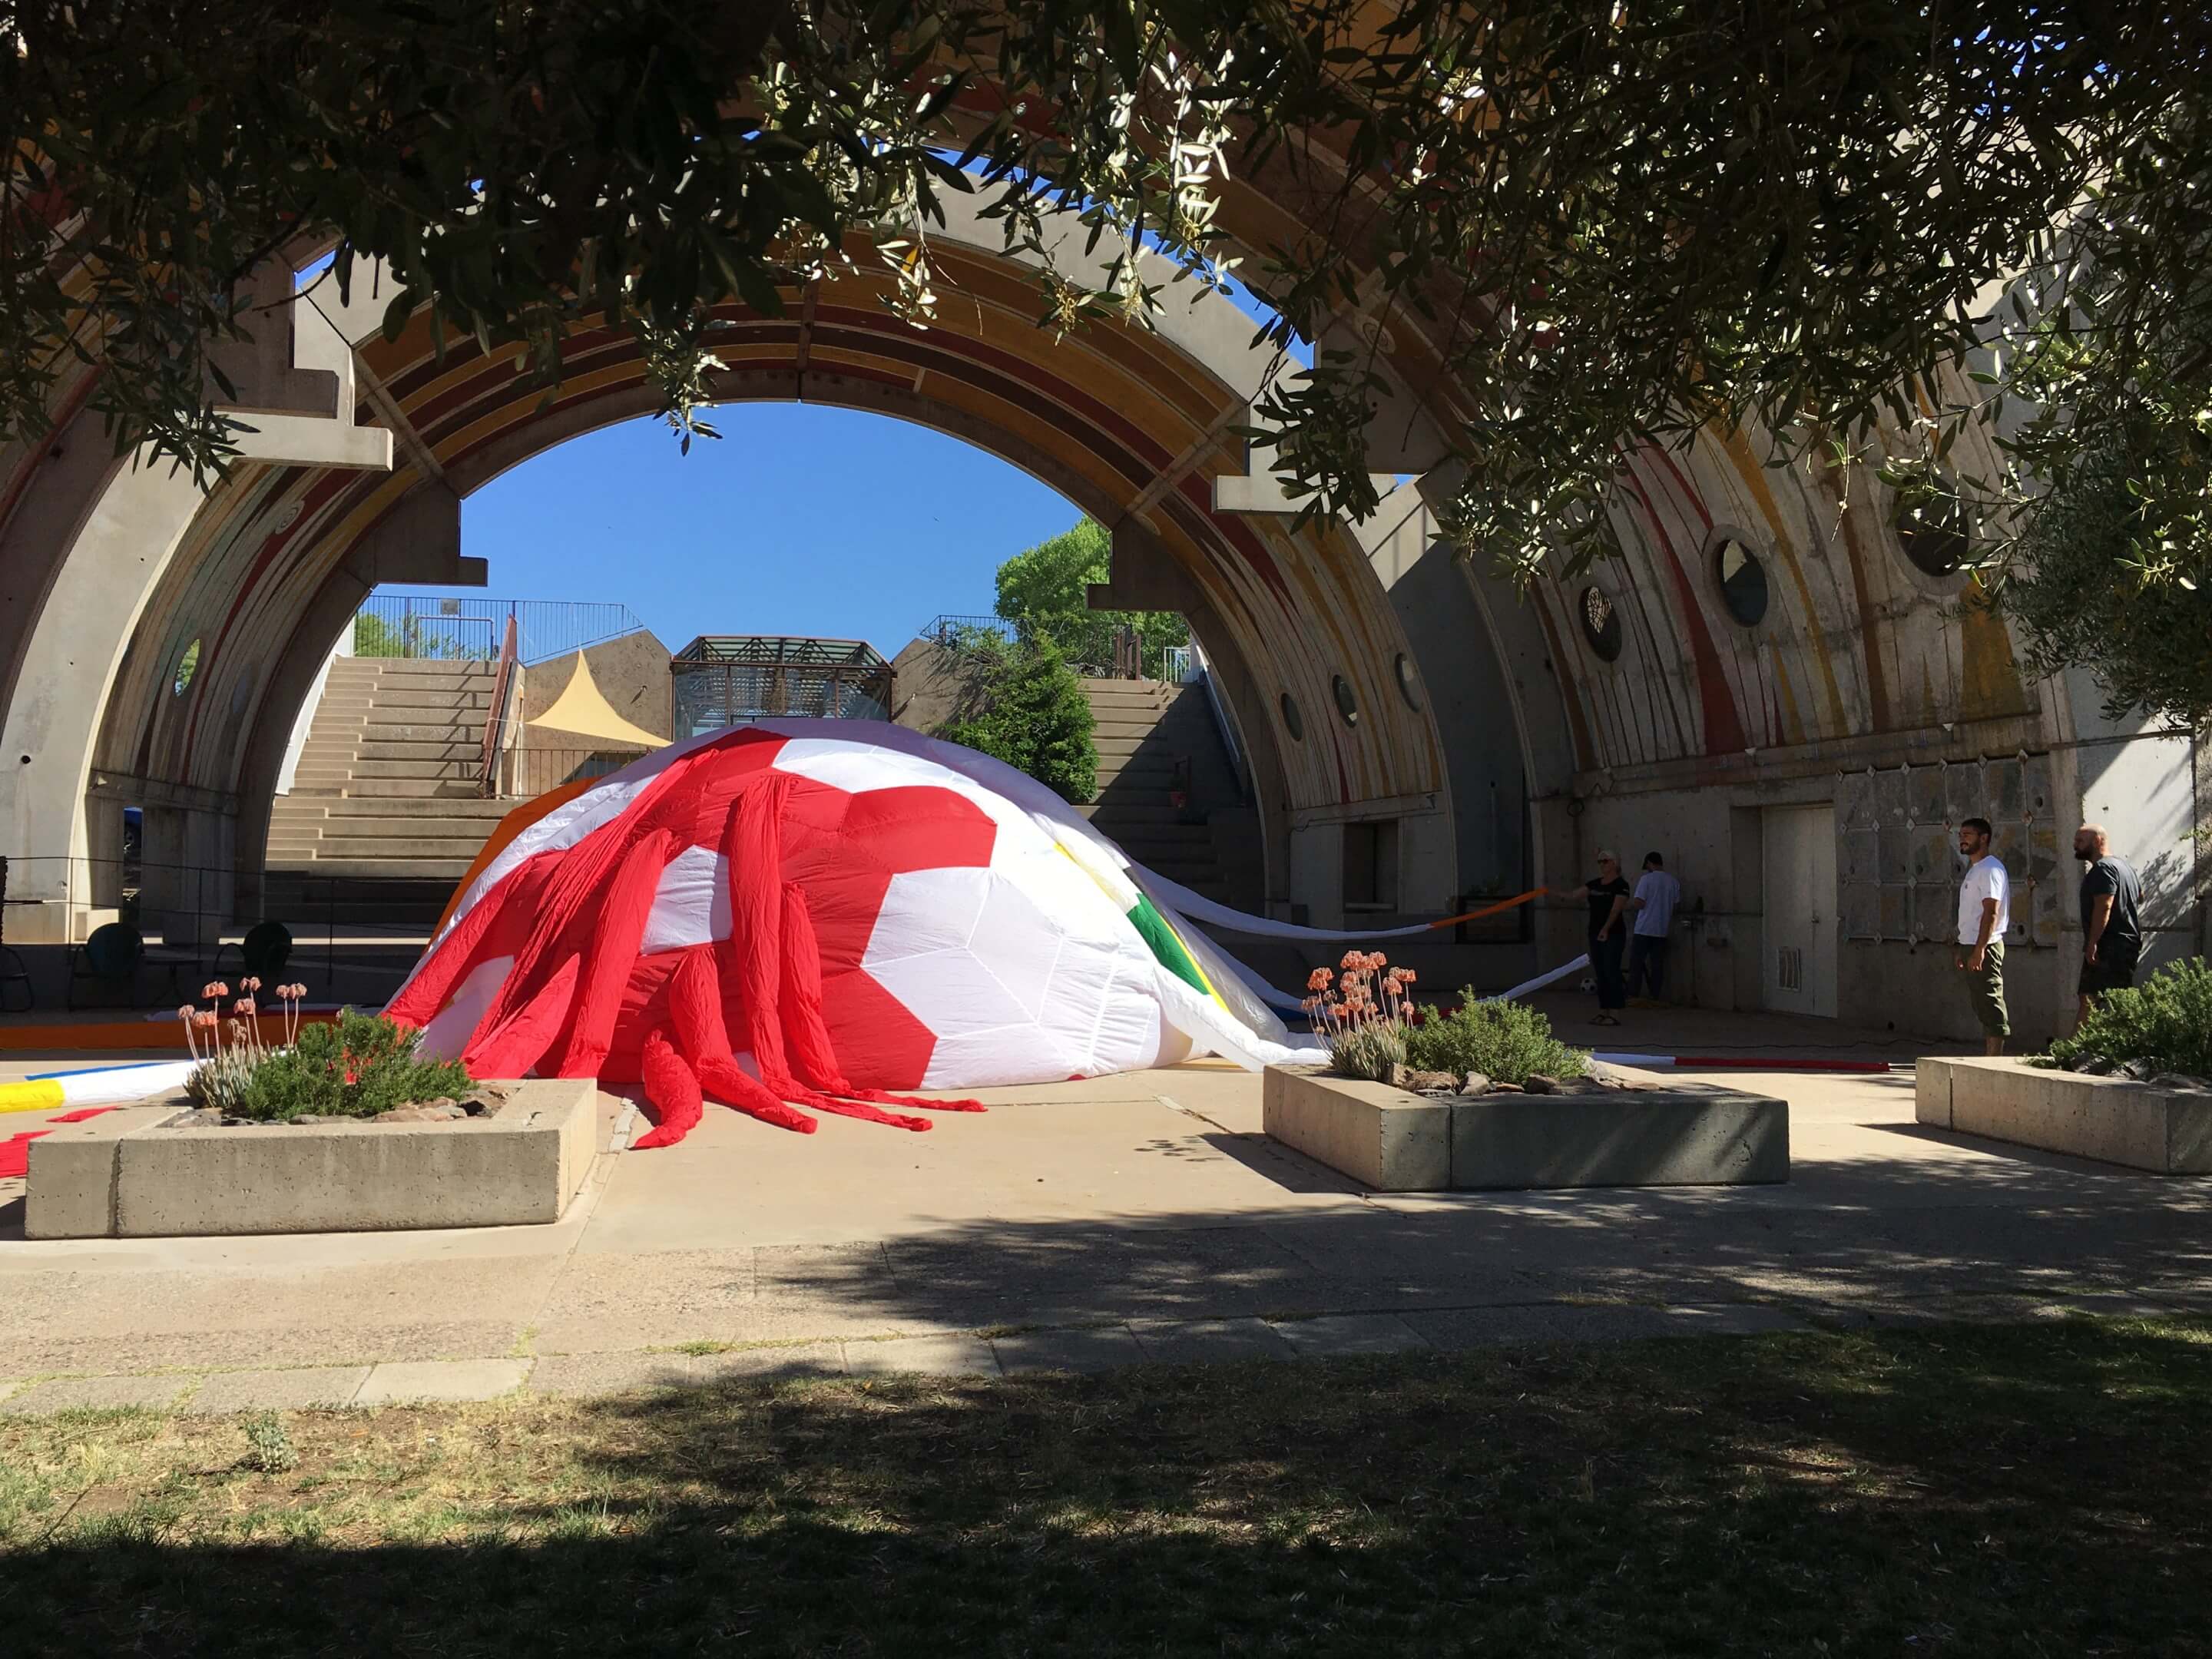 An inflateable shelter inside of an arched dome